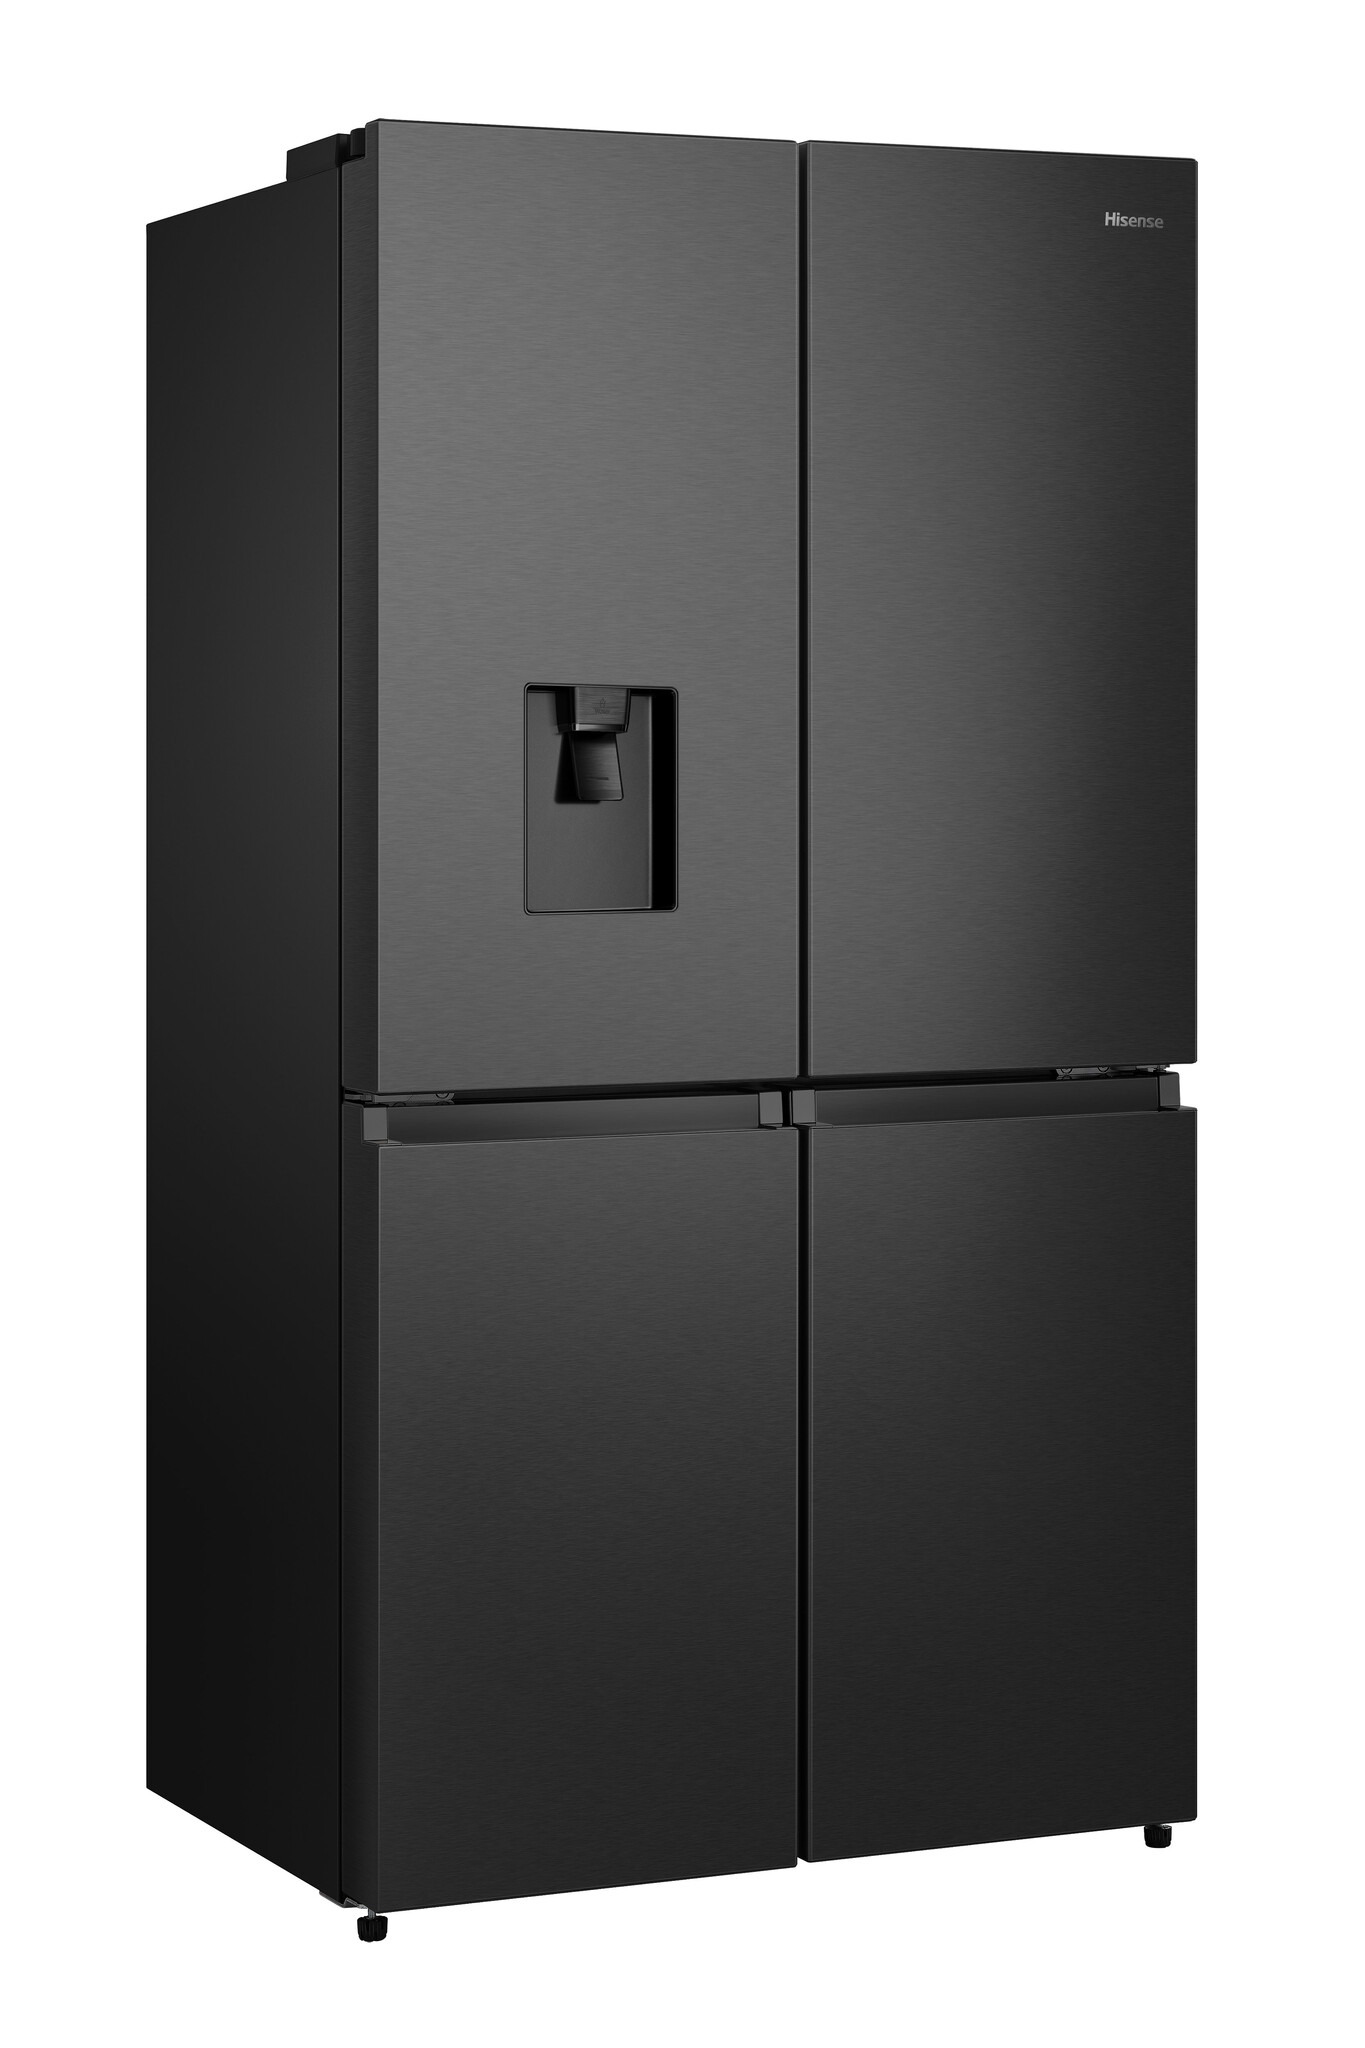 Hisense RQ758N4SWFE Wifi Connected Total No Frost American Fridge Freezer – Black – E Rated #364488